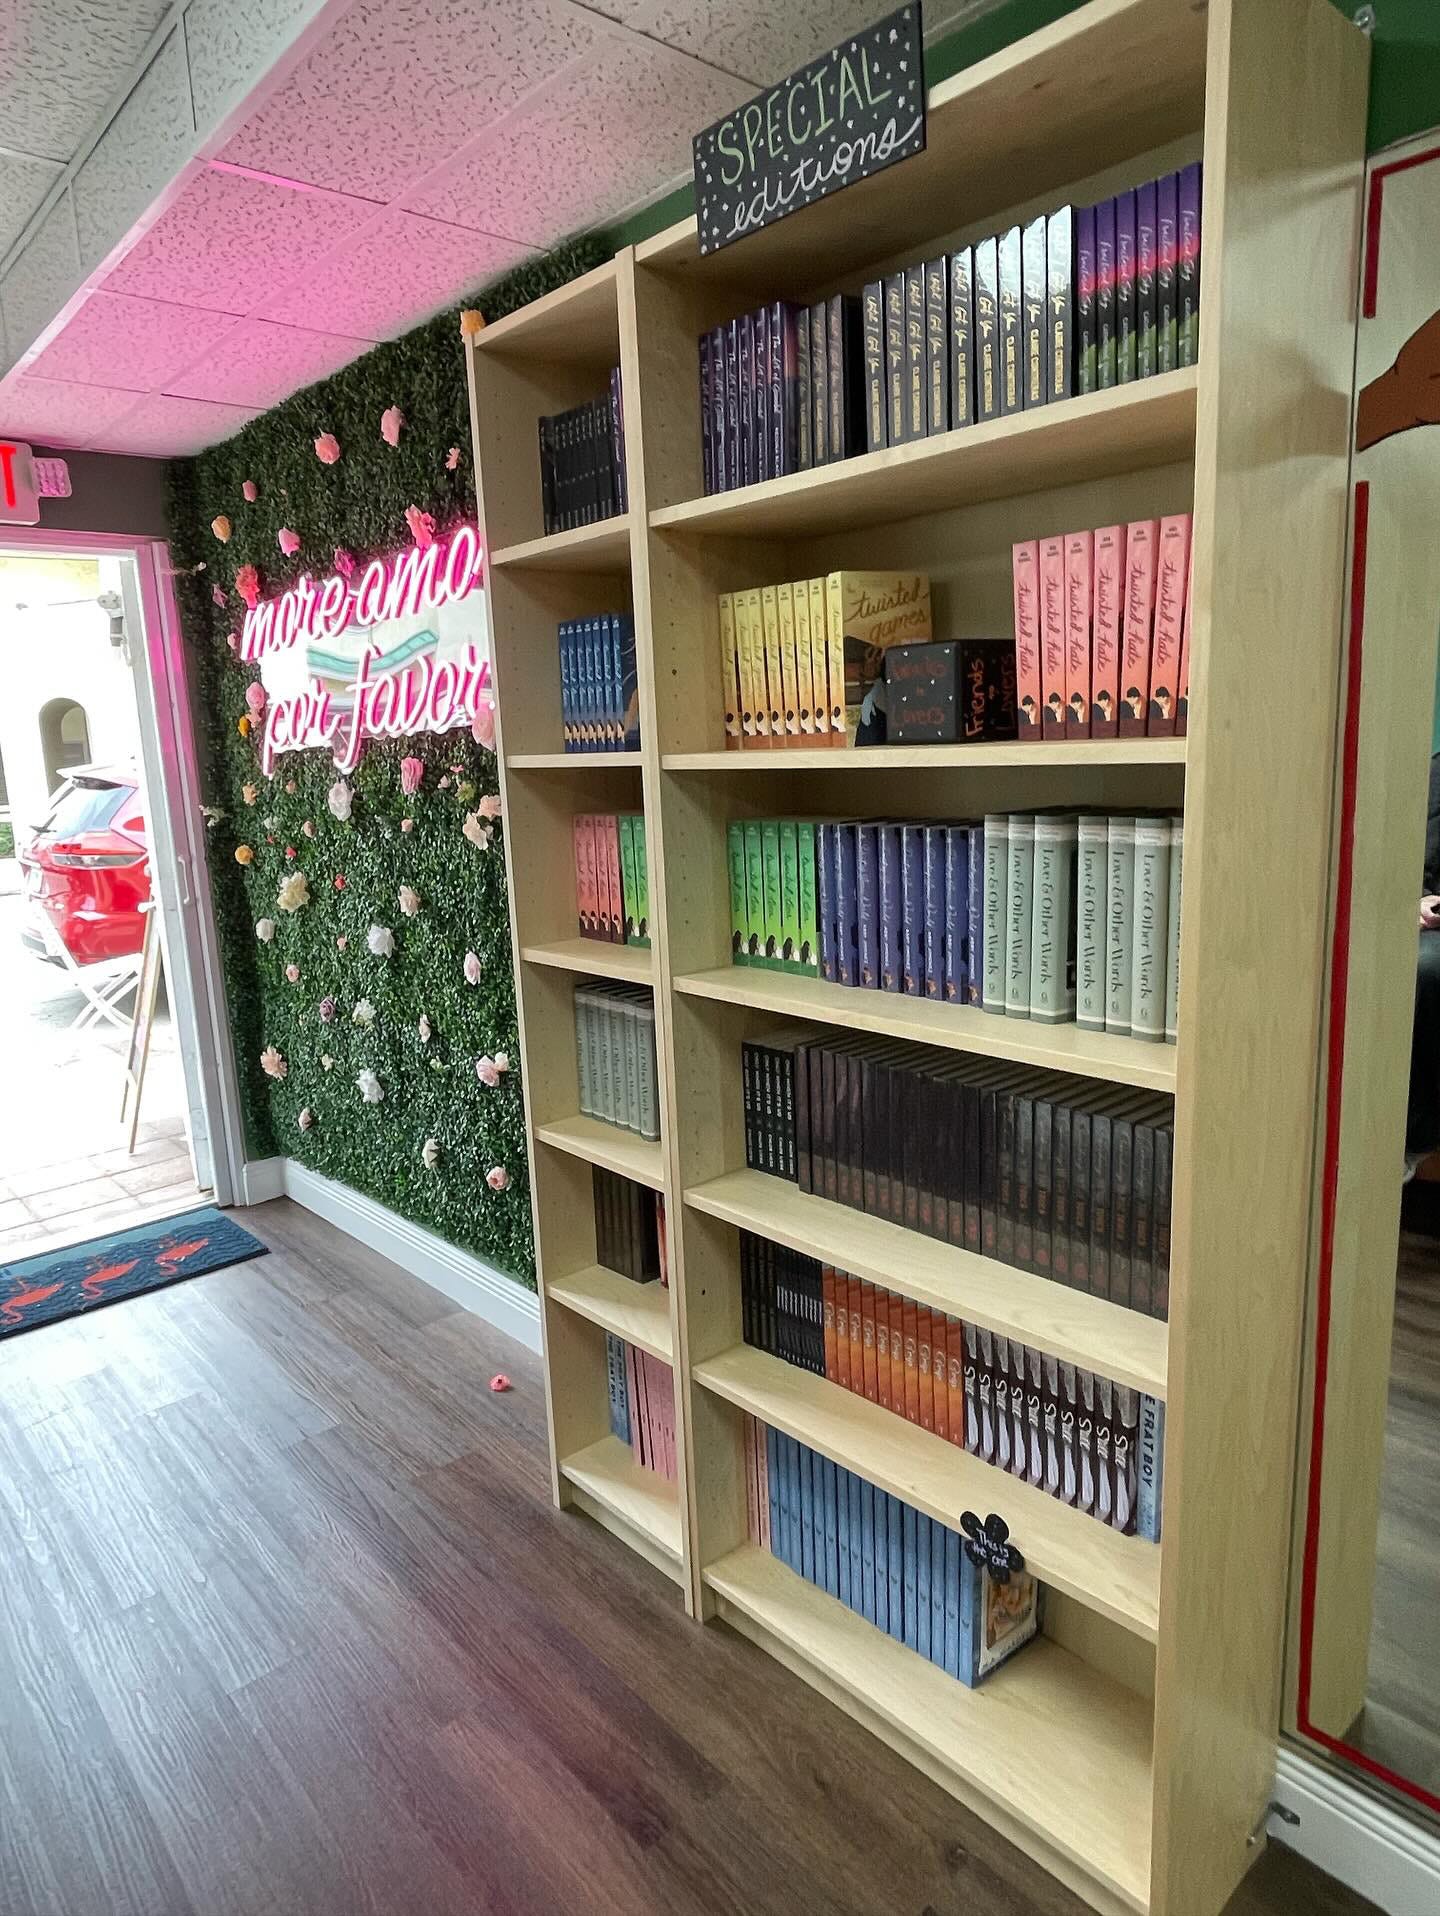 A picture of Steamy Lit Bookstore that shows a shelf of special editions and then the wall art that says "more amor por favor"